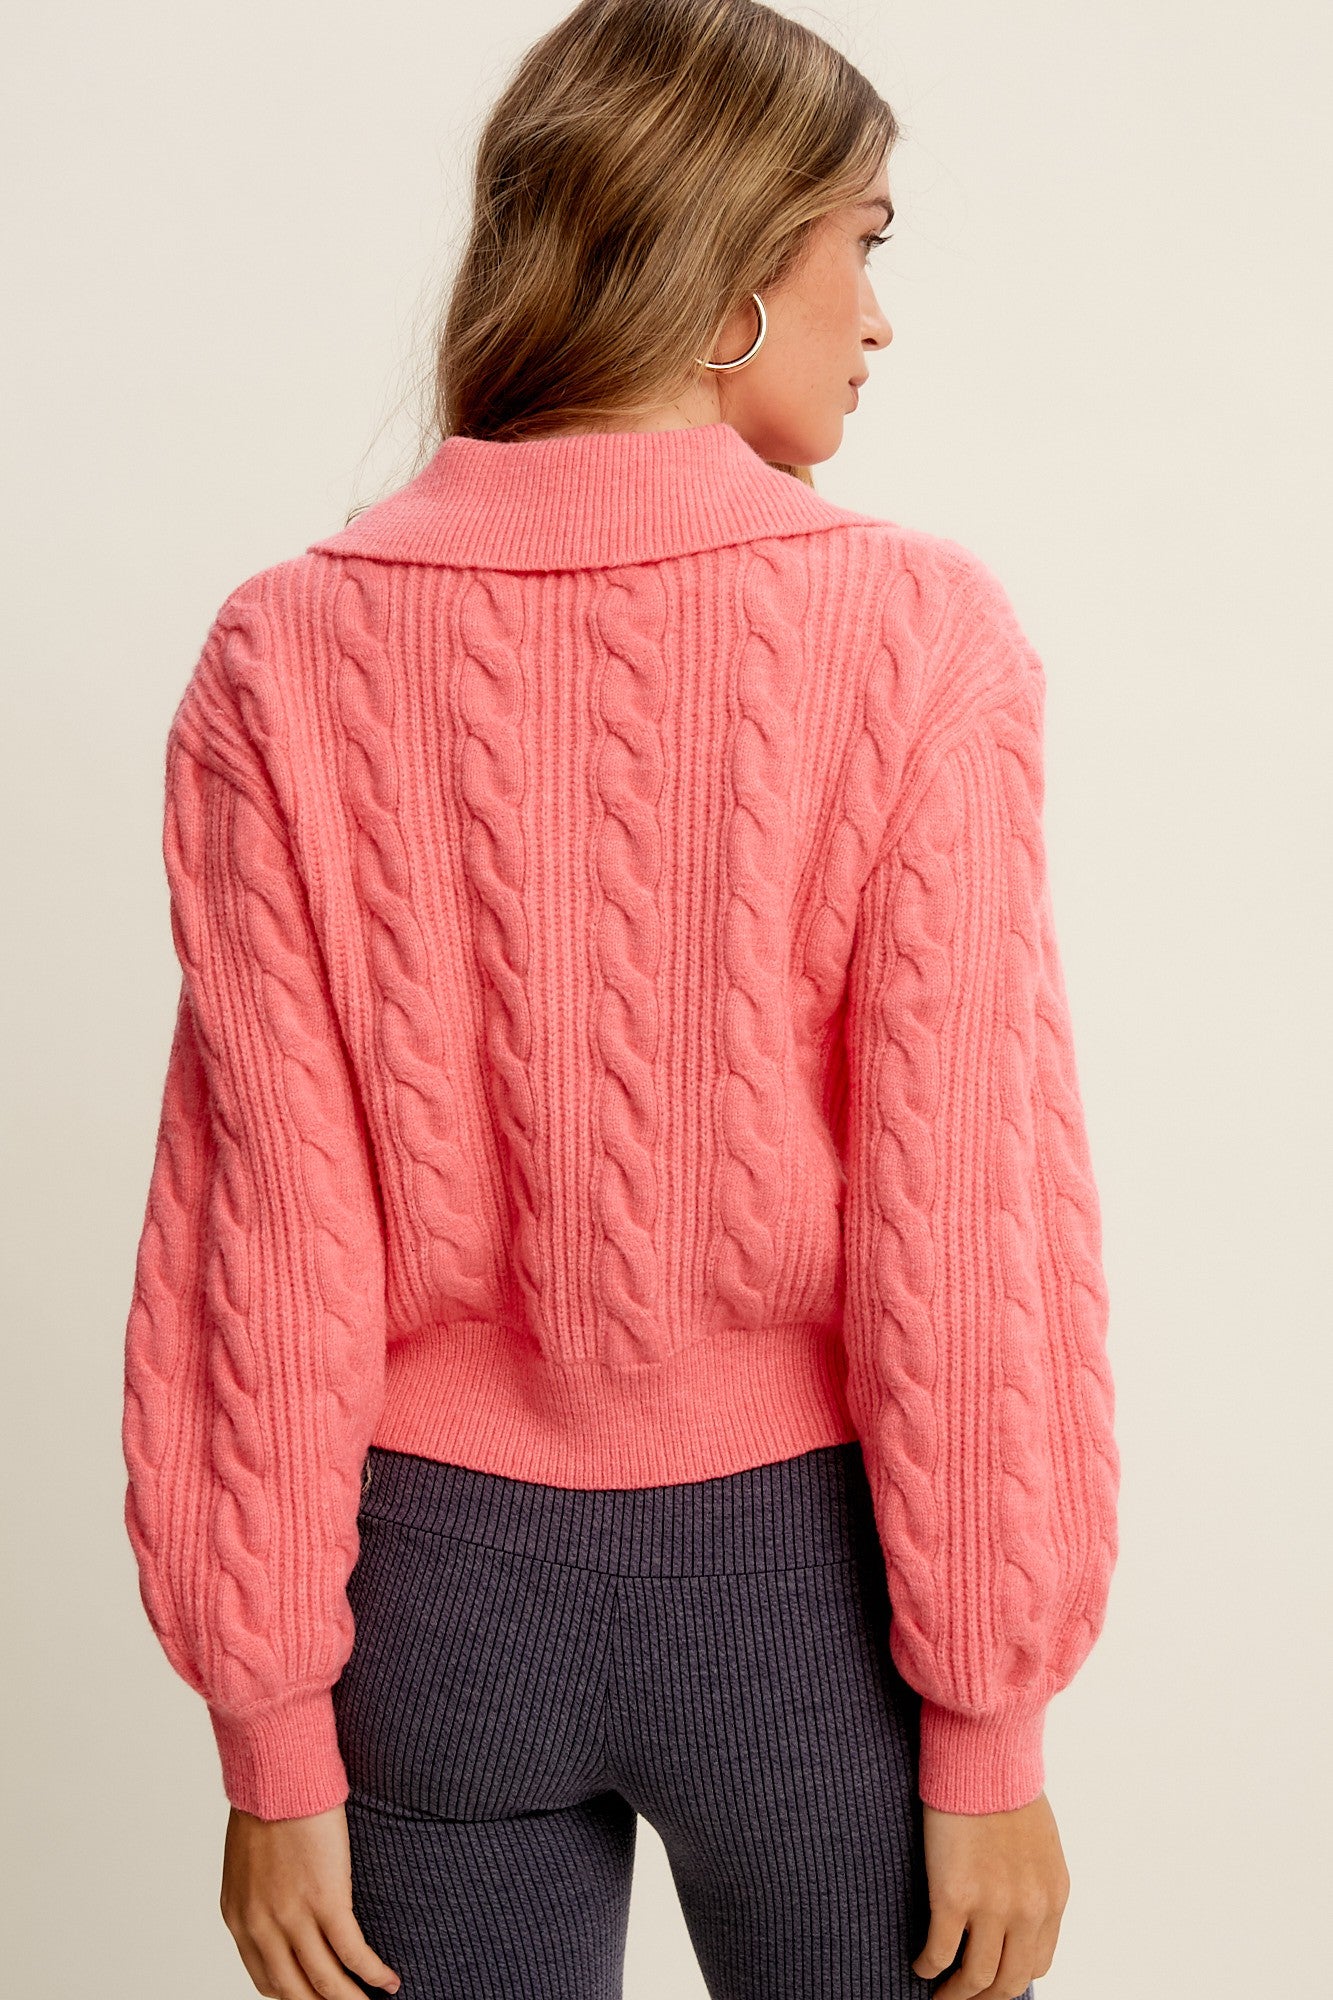 Bright Pink Cable Knit Polo Style Pullover Knit Sweater